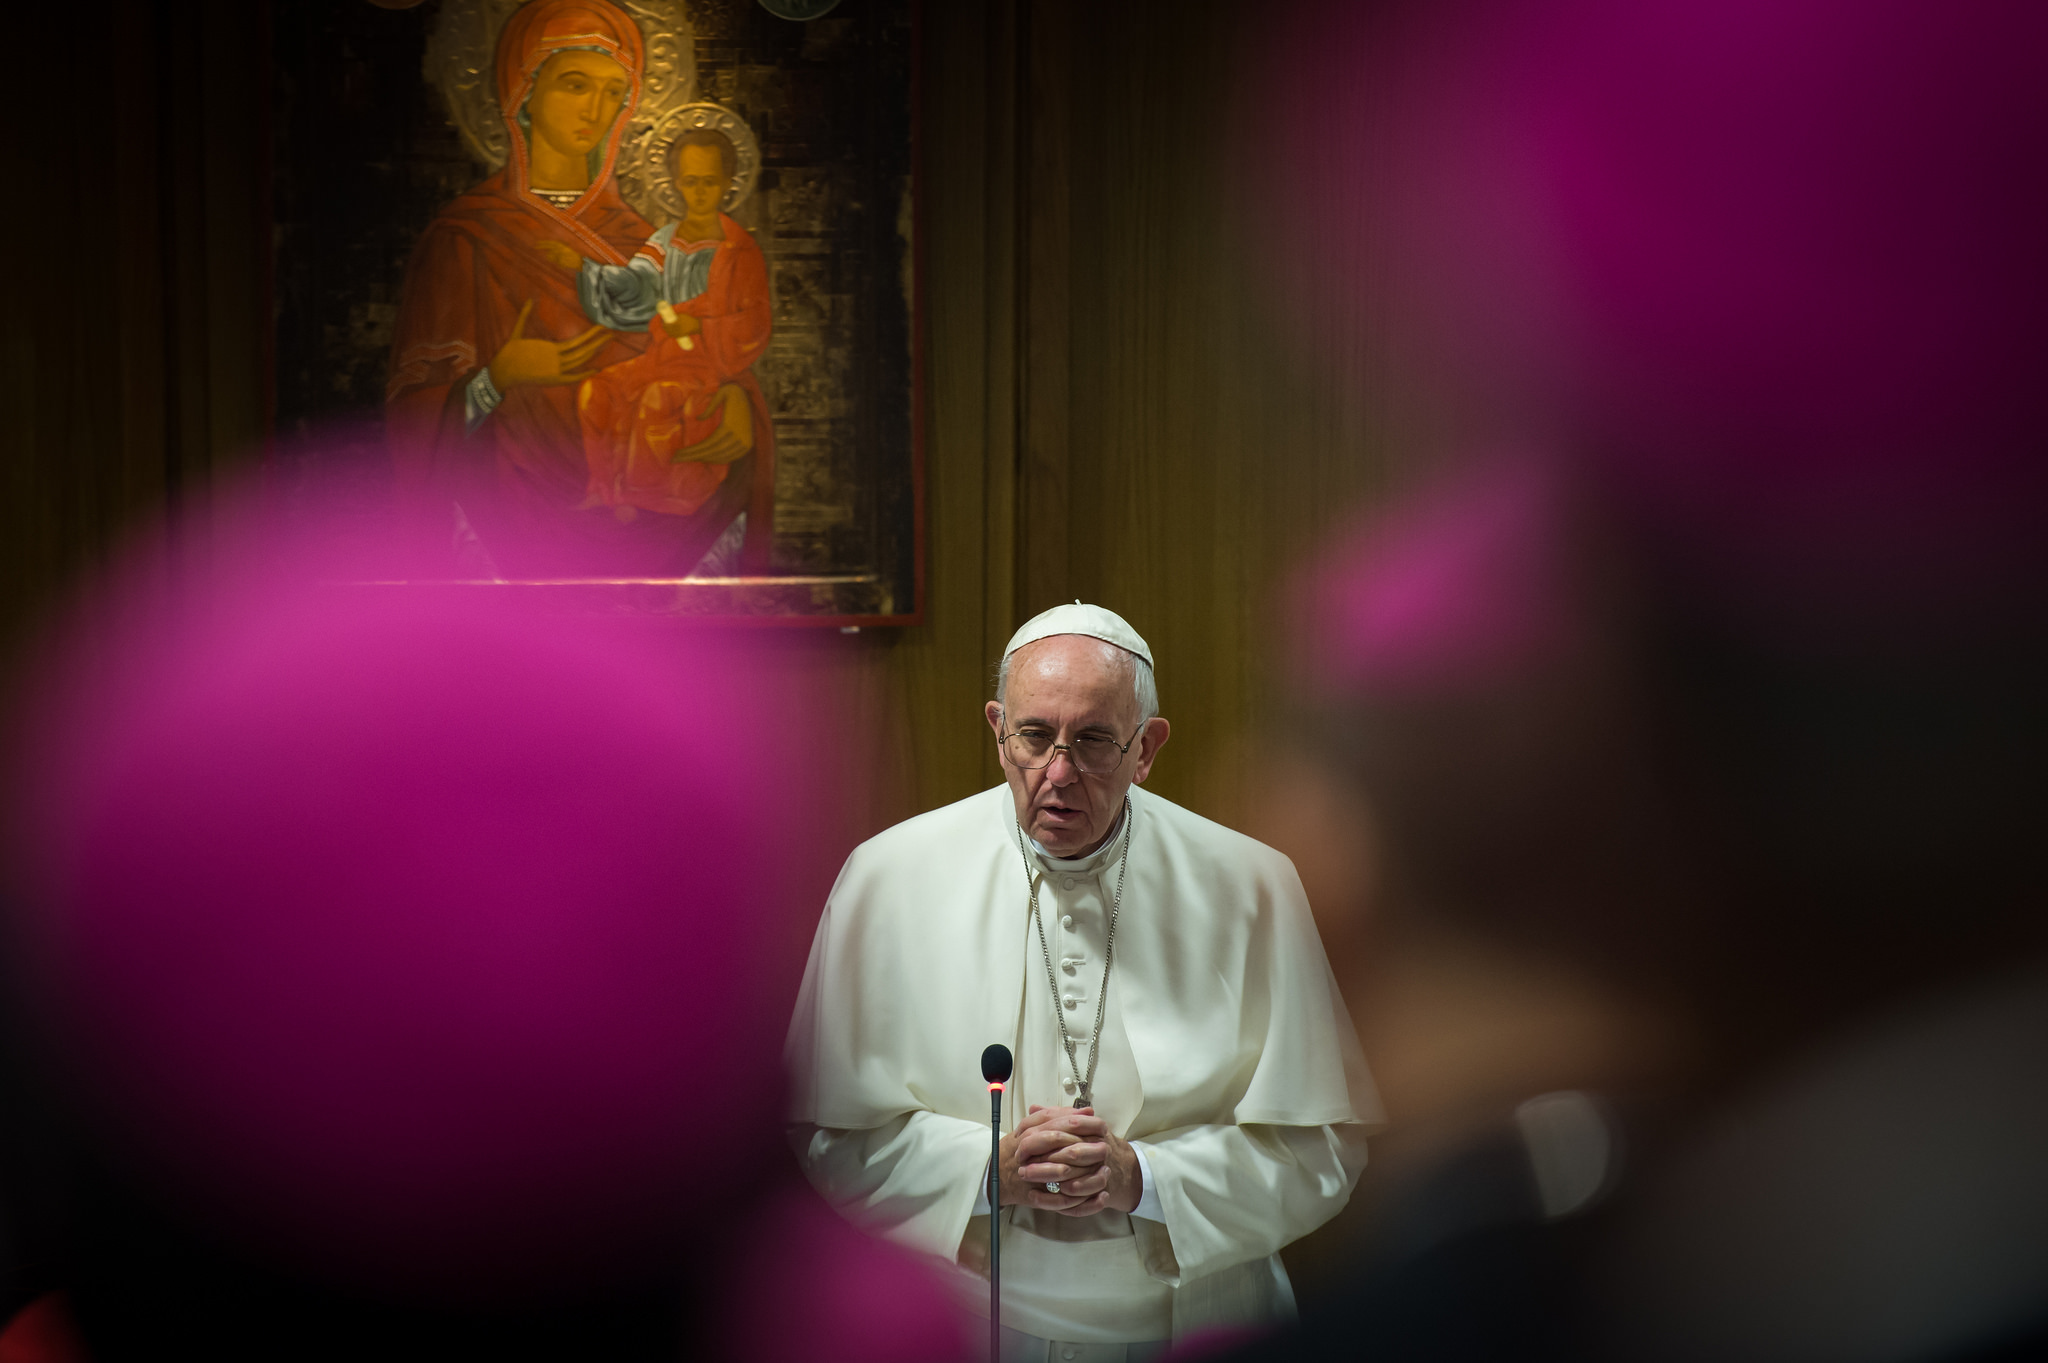 Pope Francis praying during the Synod of Bishops in the Vatican